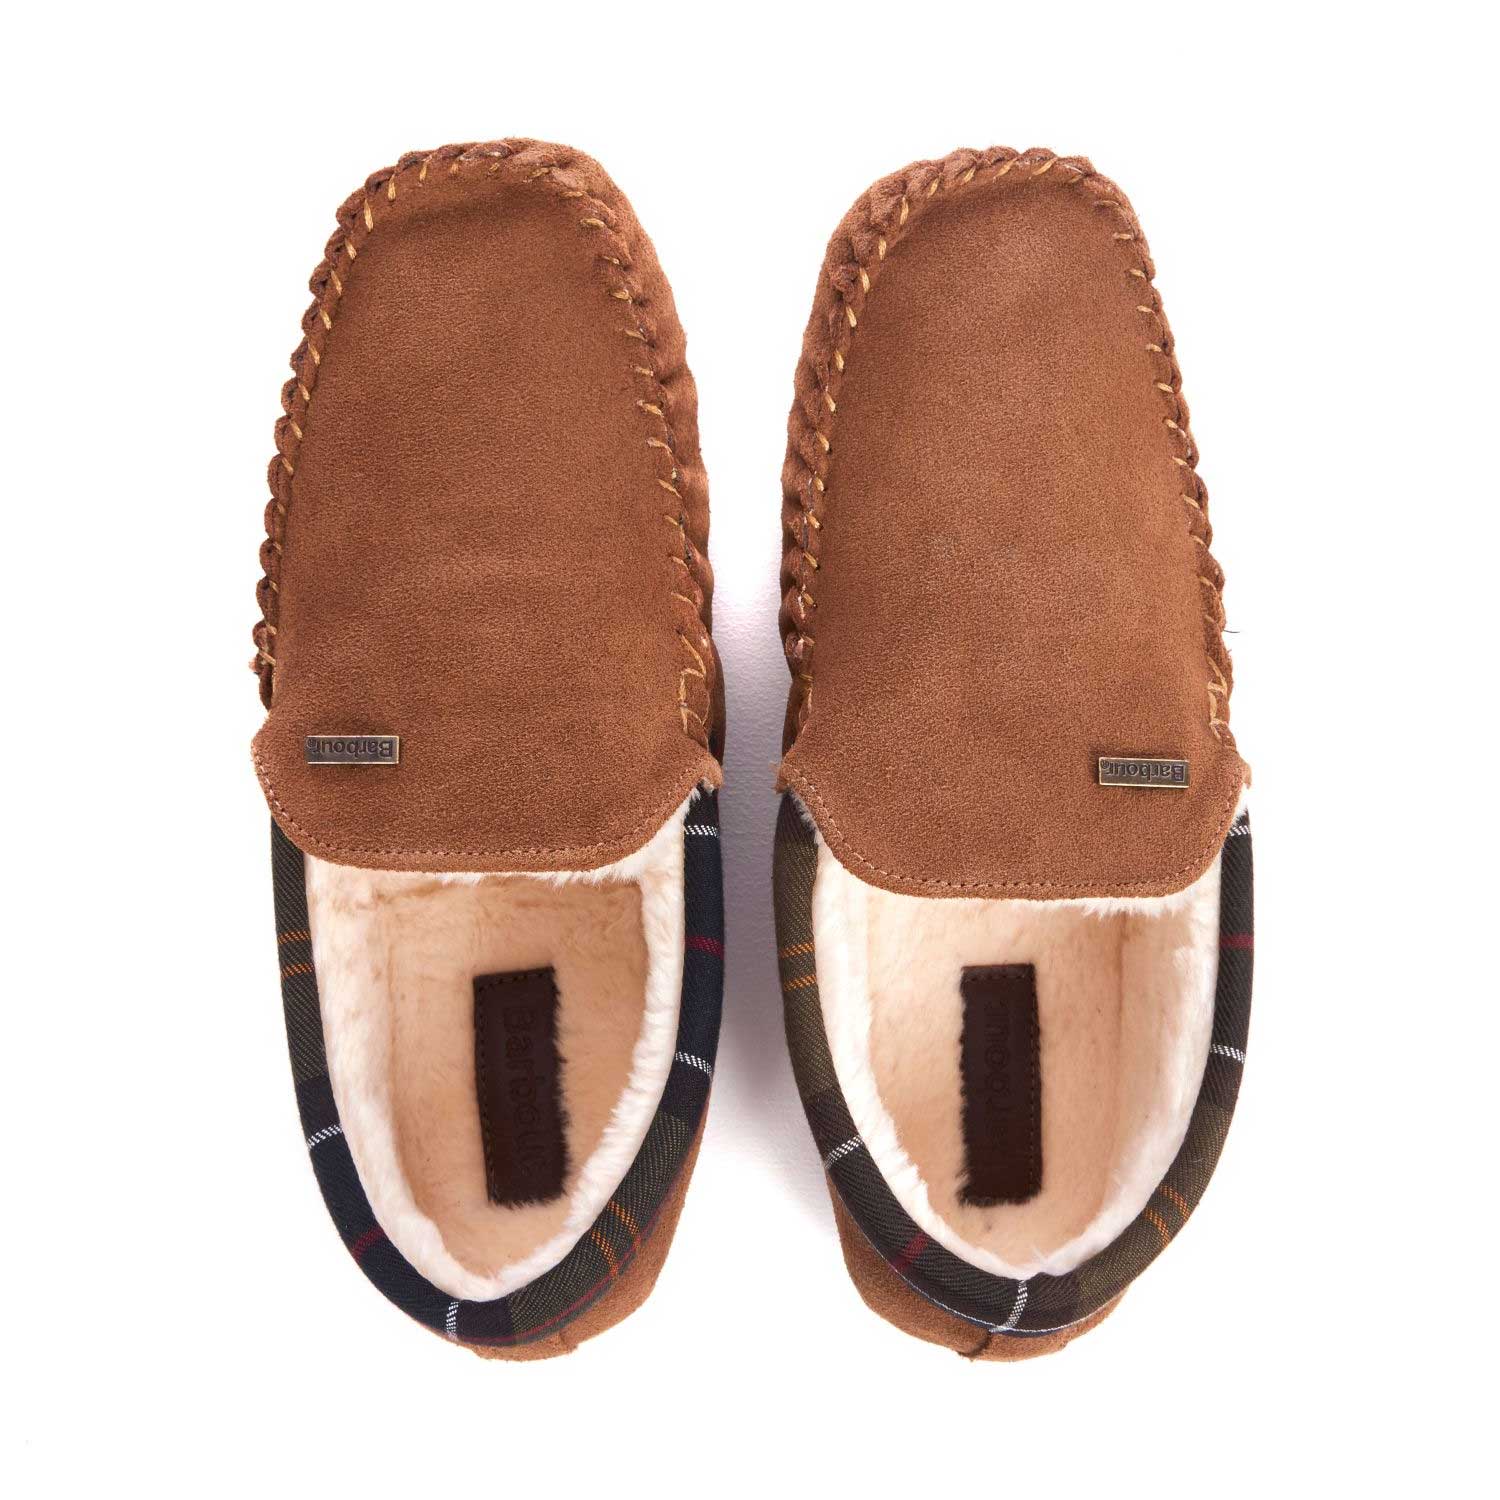 BARBOUR Slippers - Mens Monty Moccasin - Camel Suede